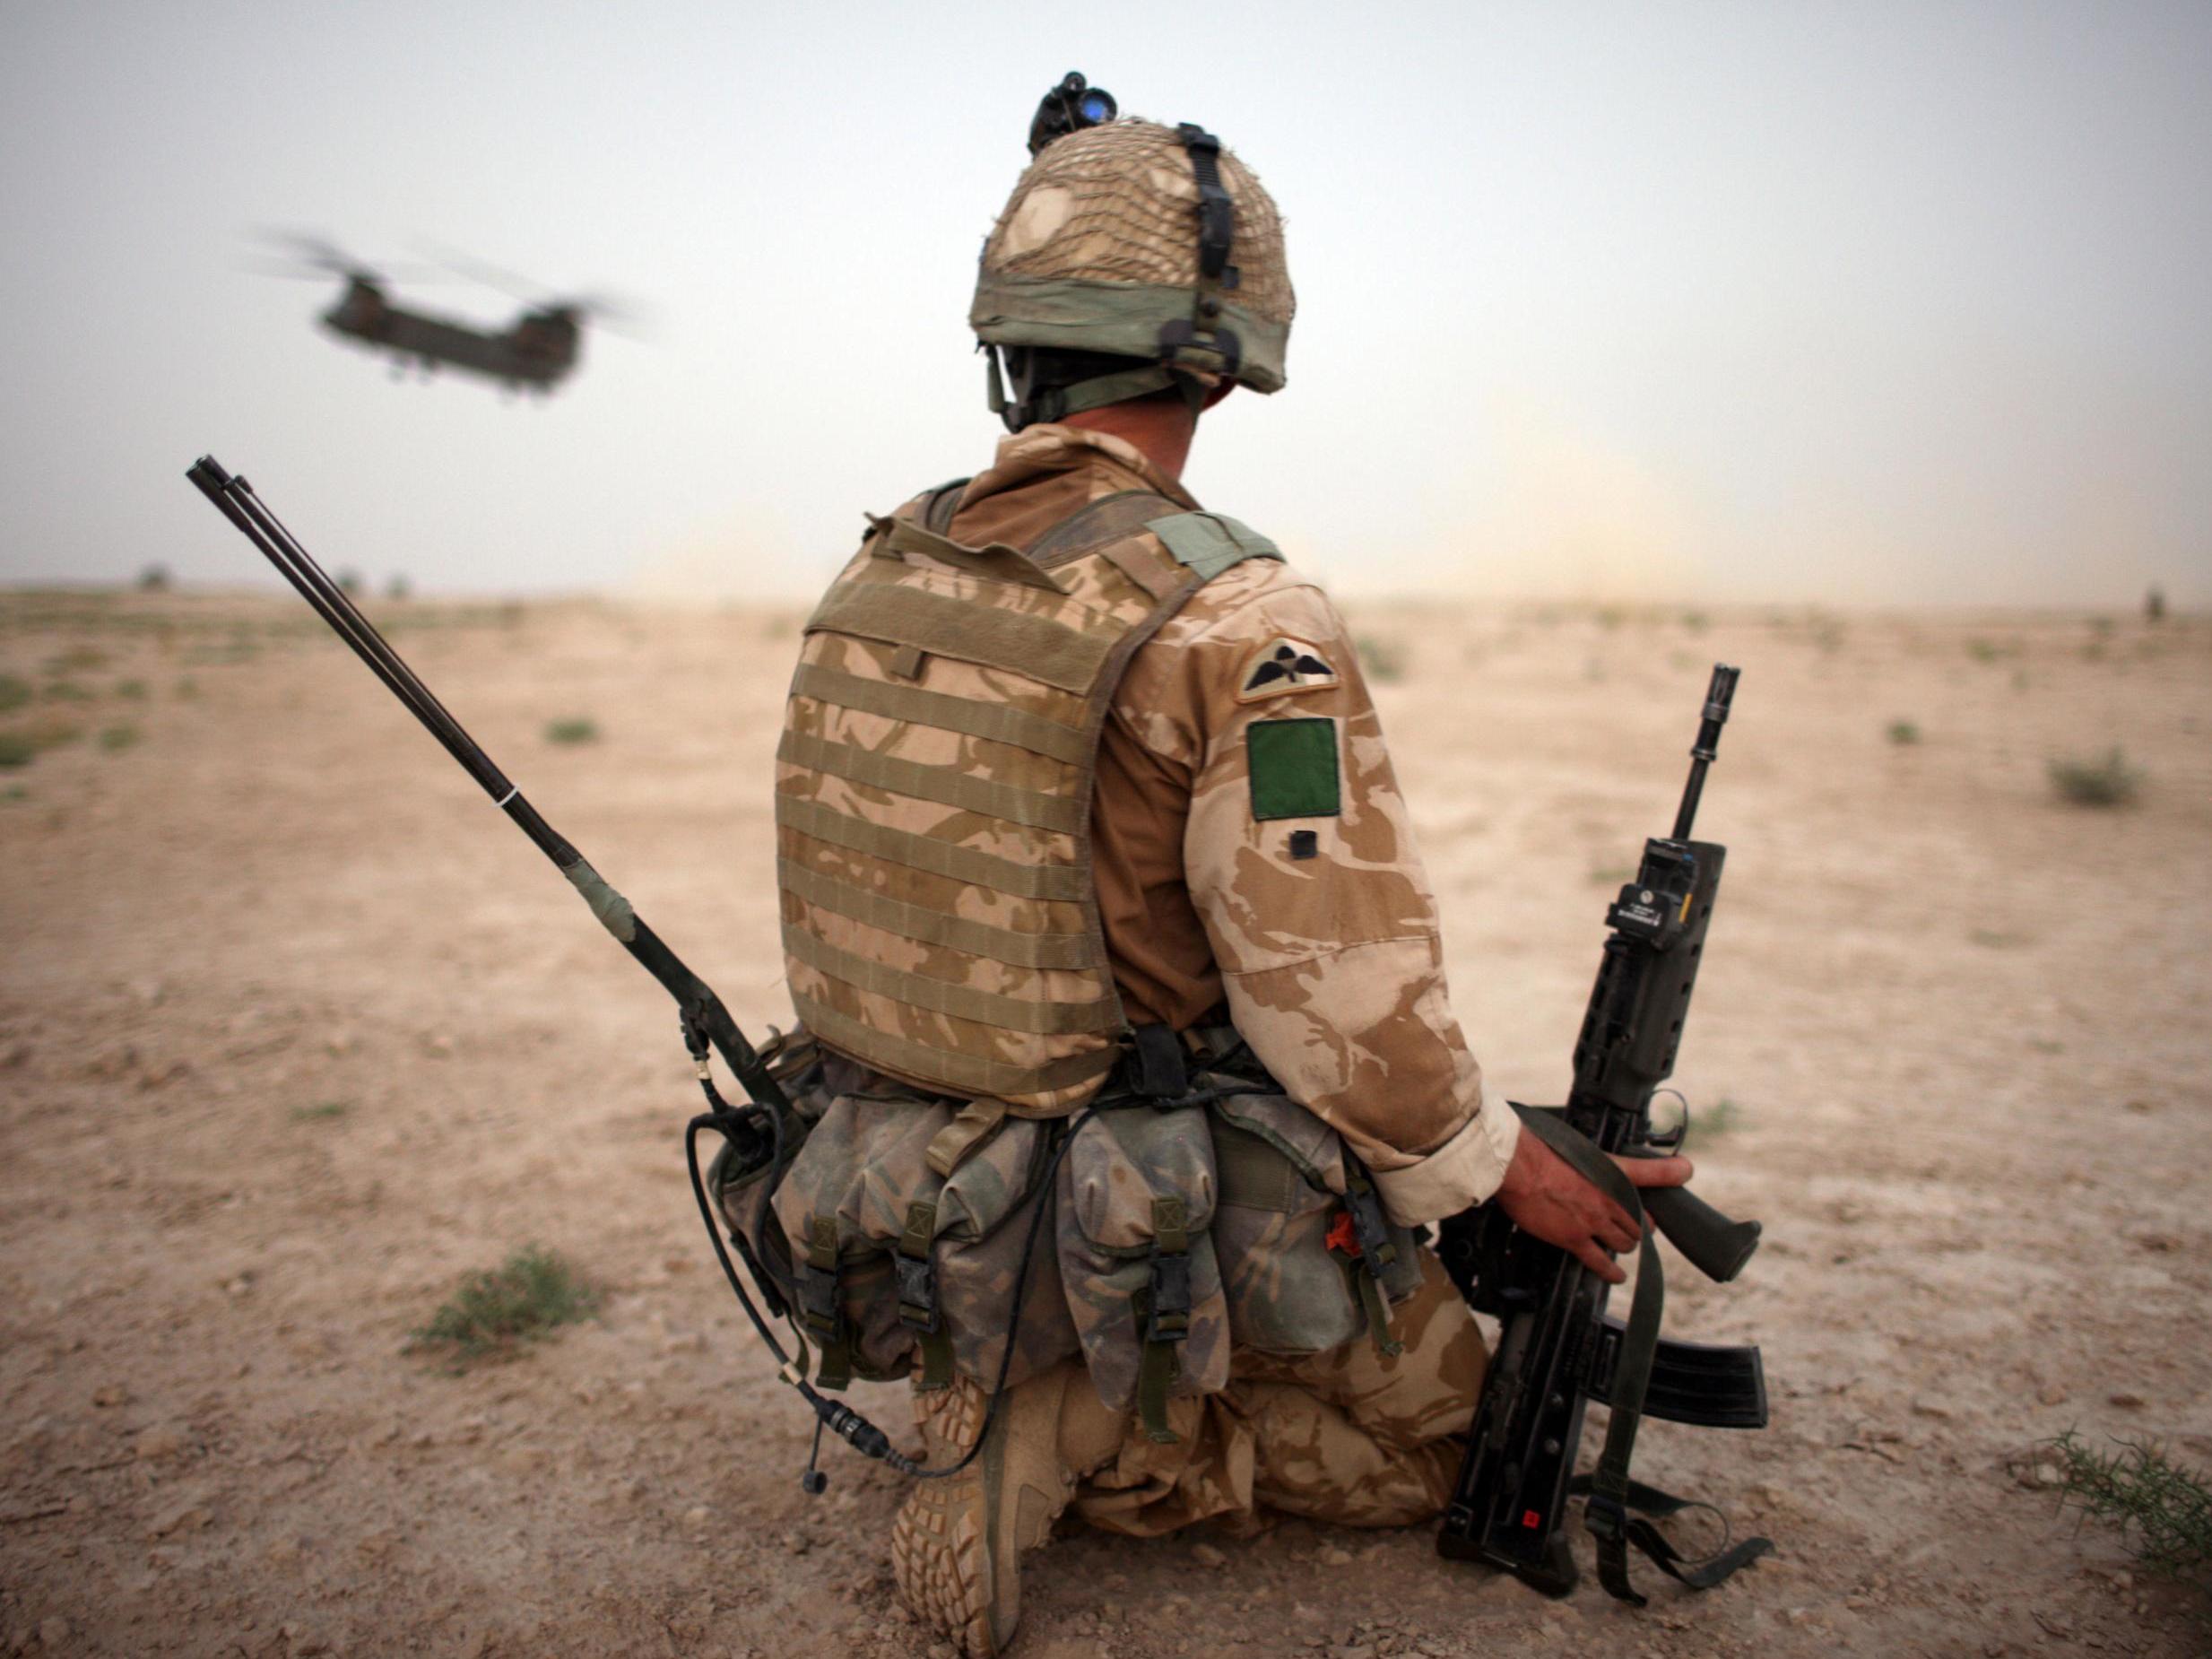 Former military personnel deployed to Iraq and Afghanistan have particularly high rates of PTSD